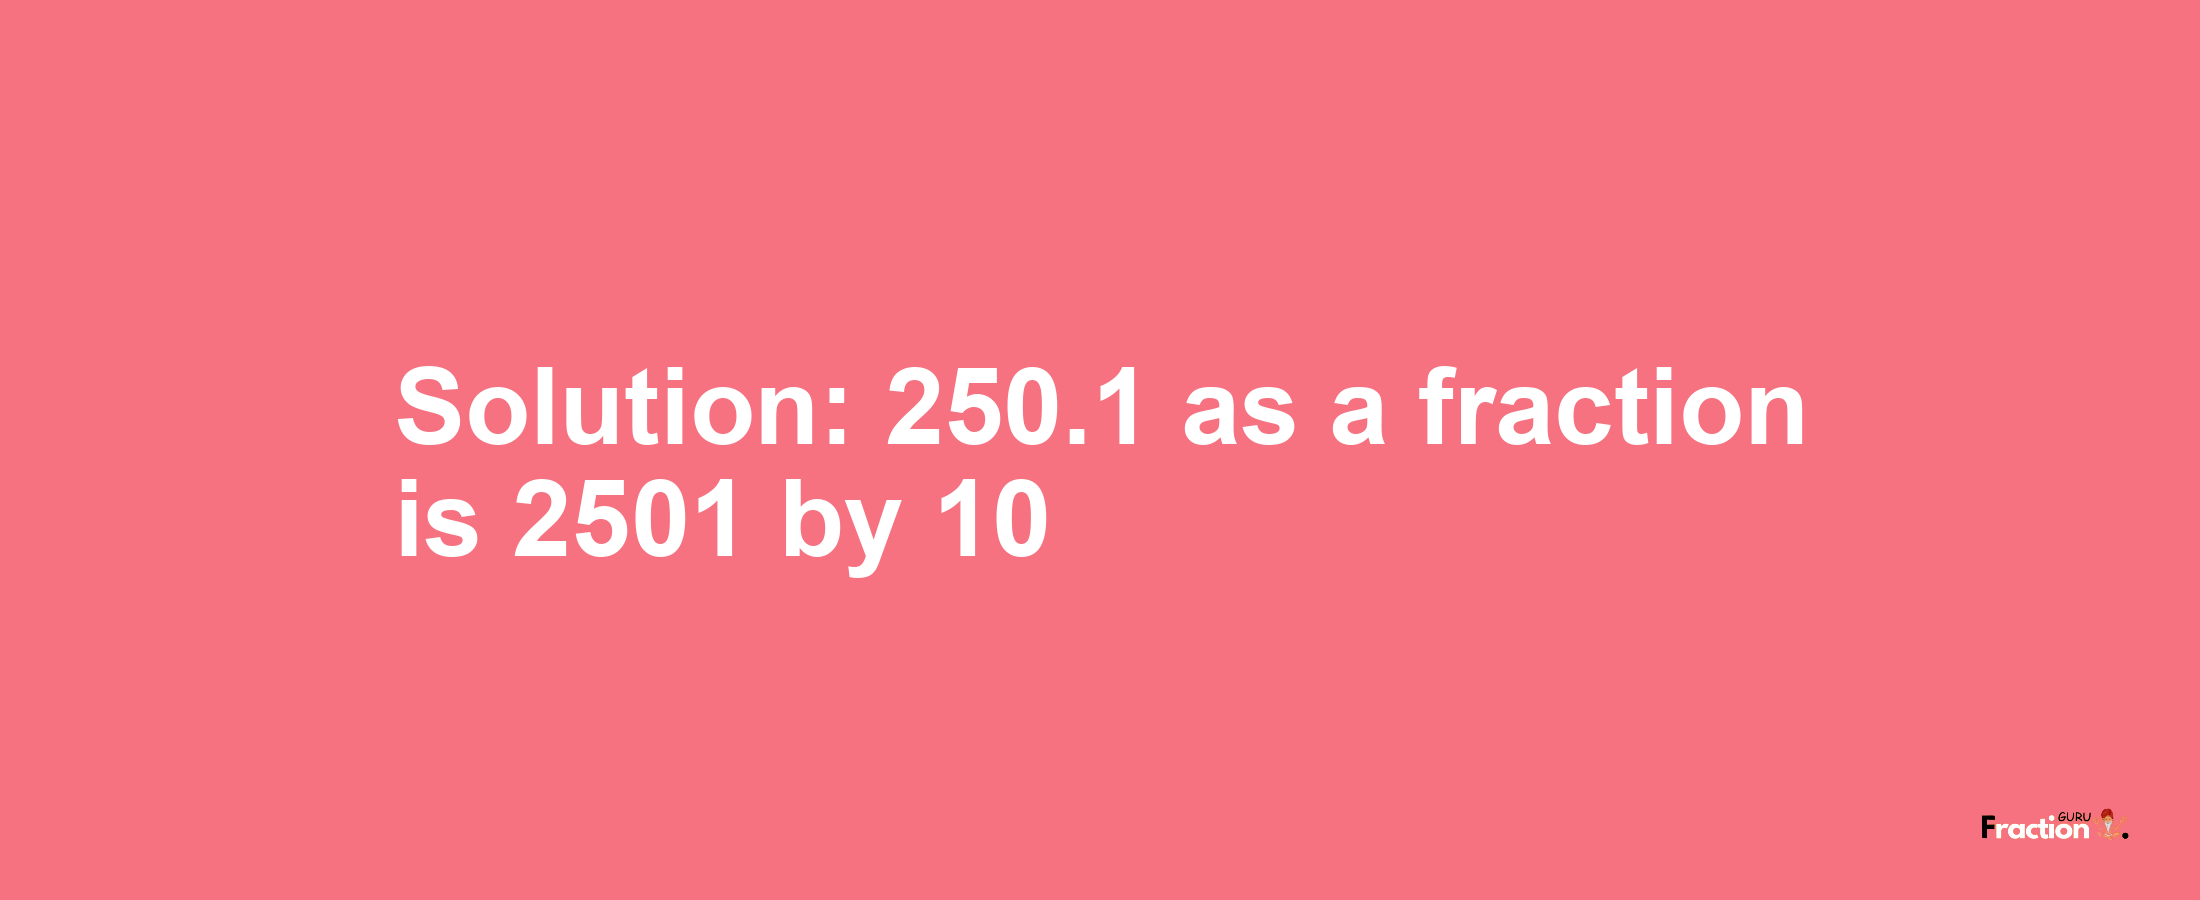 Solution:250.1 as a fraction is 2501/10